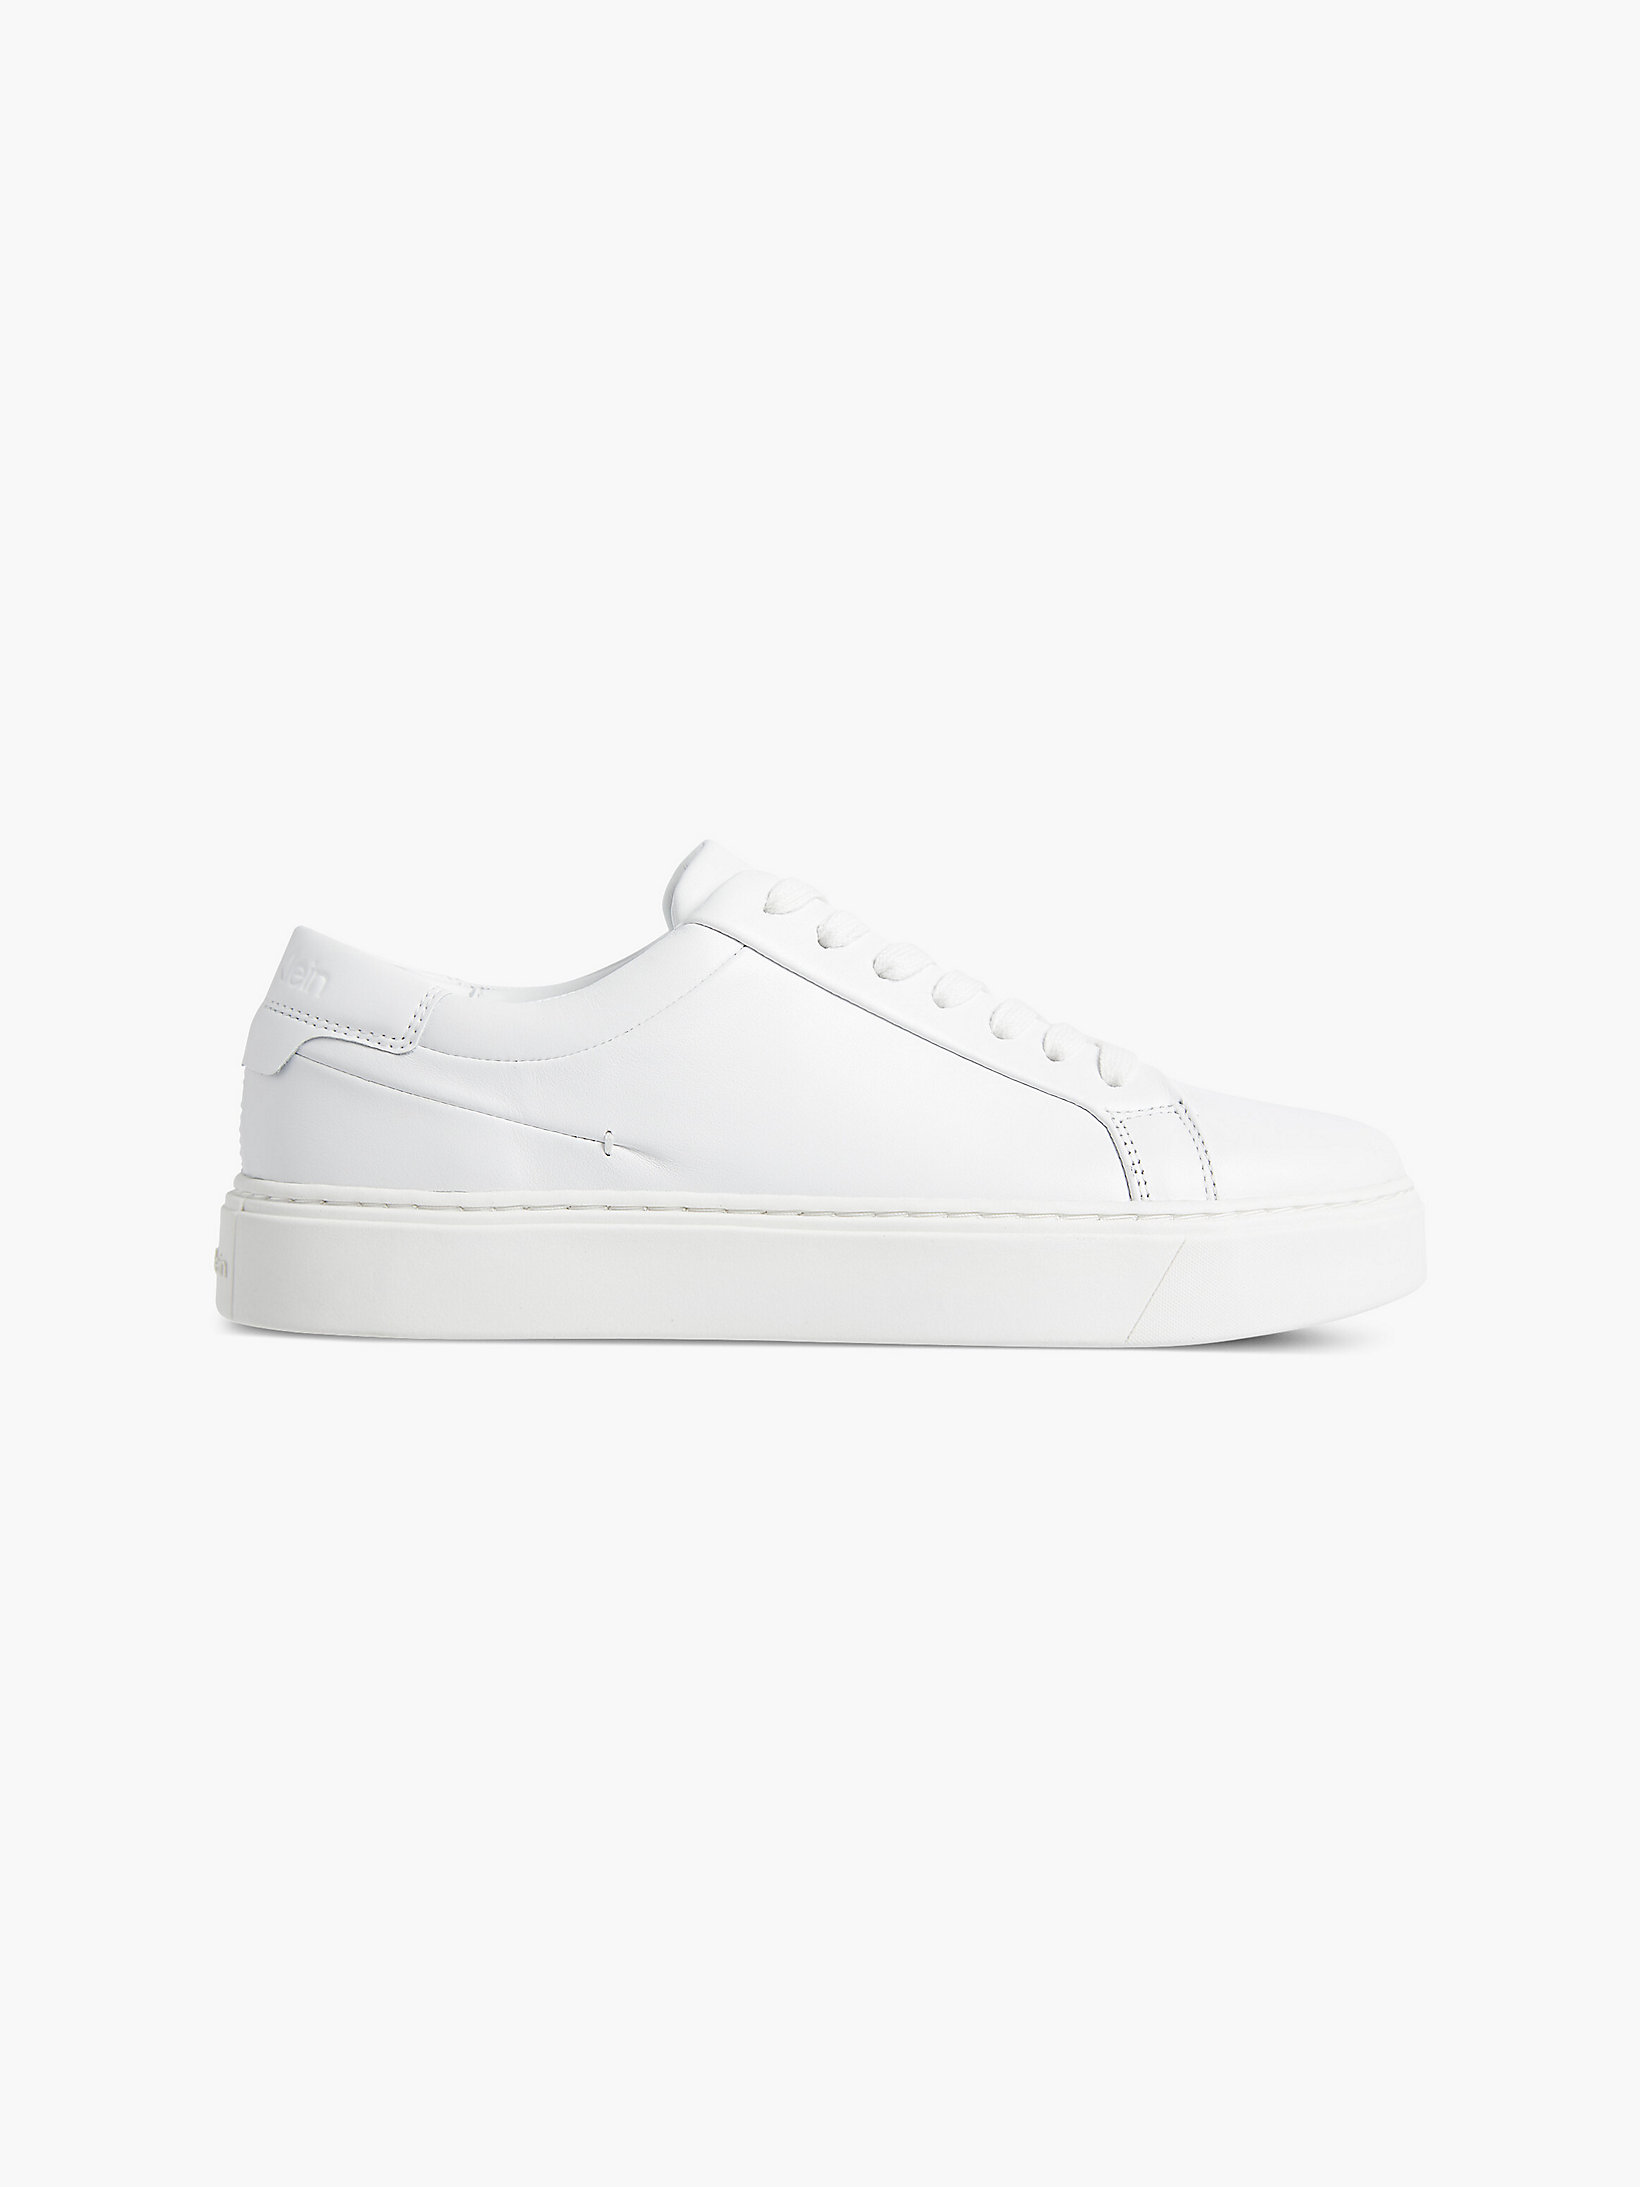 Triple White Leather Trainers undefined men Calvin Klein